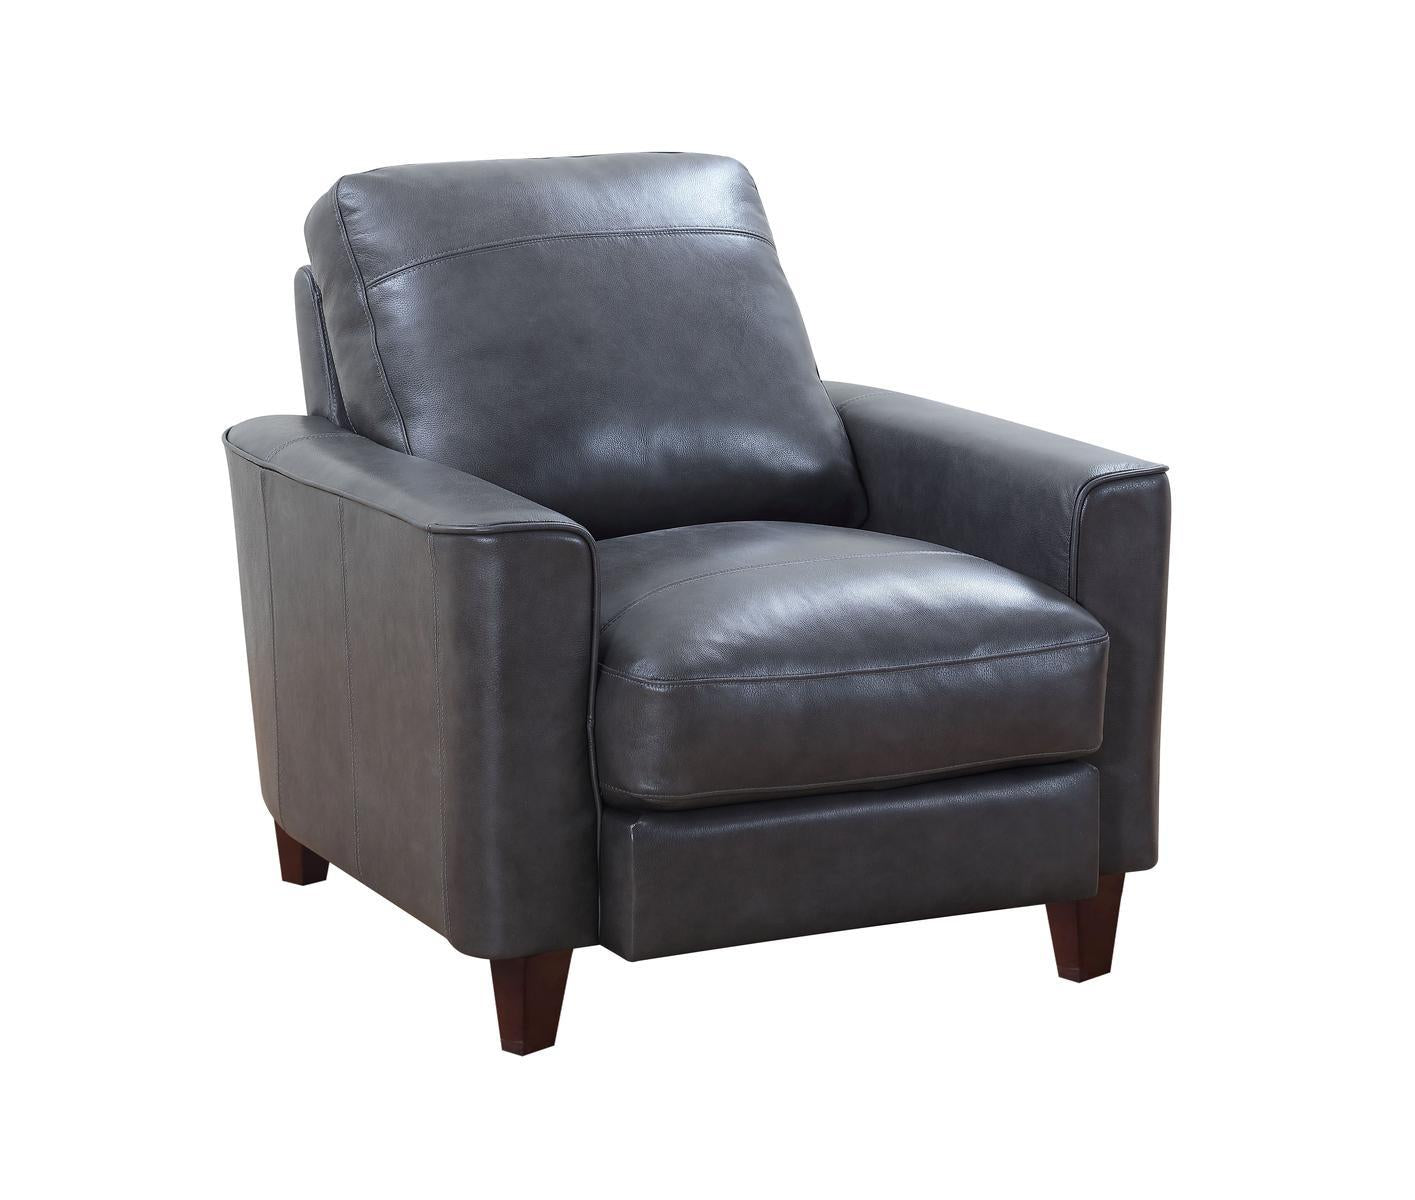 Leather Italia Georgetown-Chino Chair in Grey